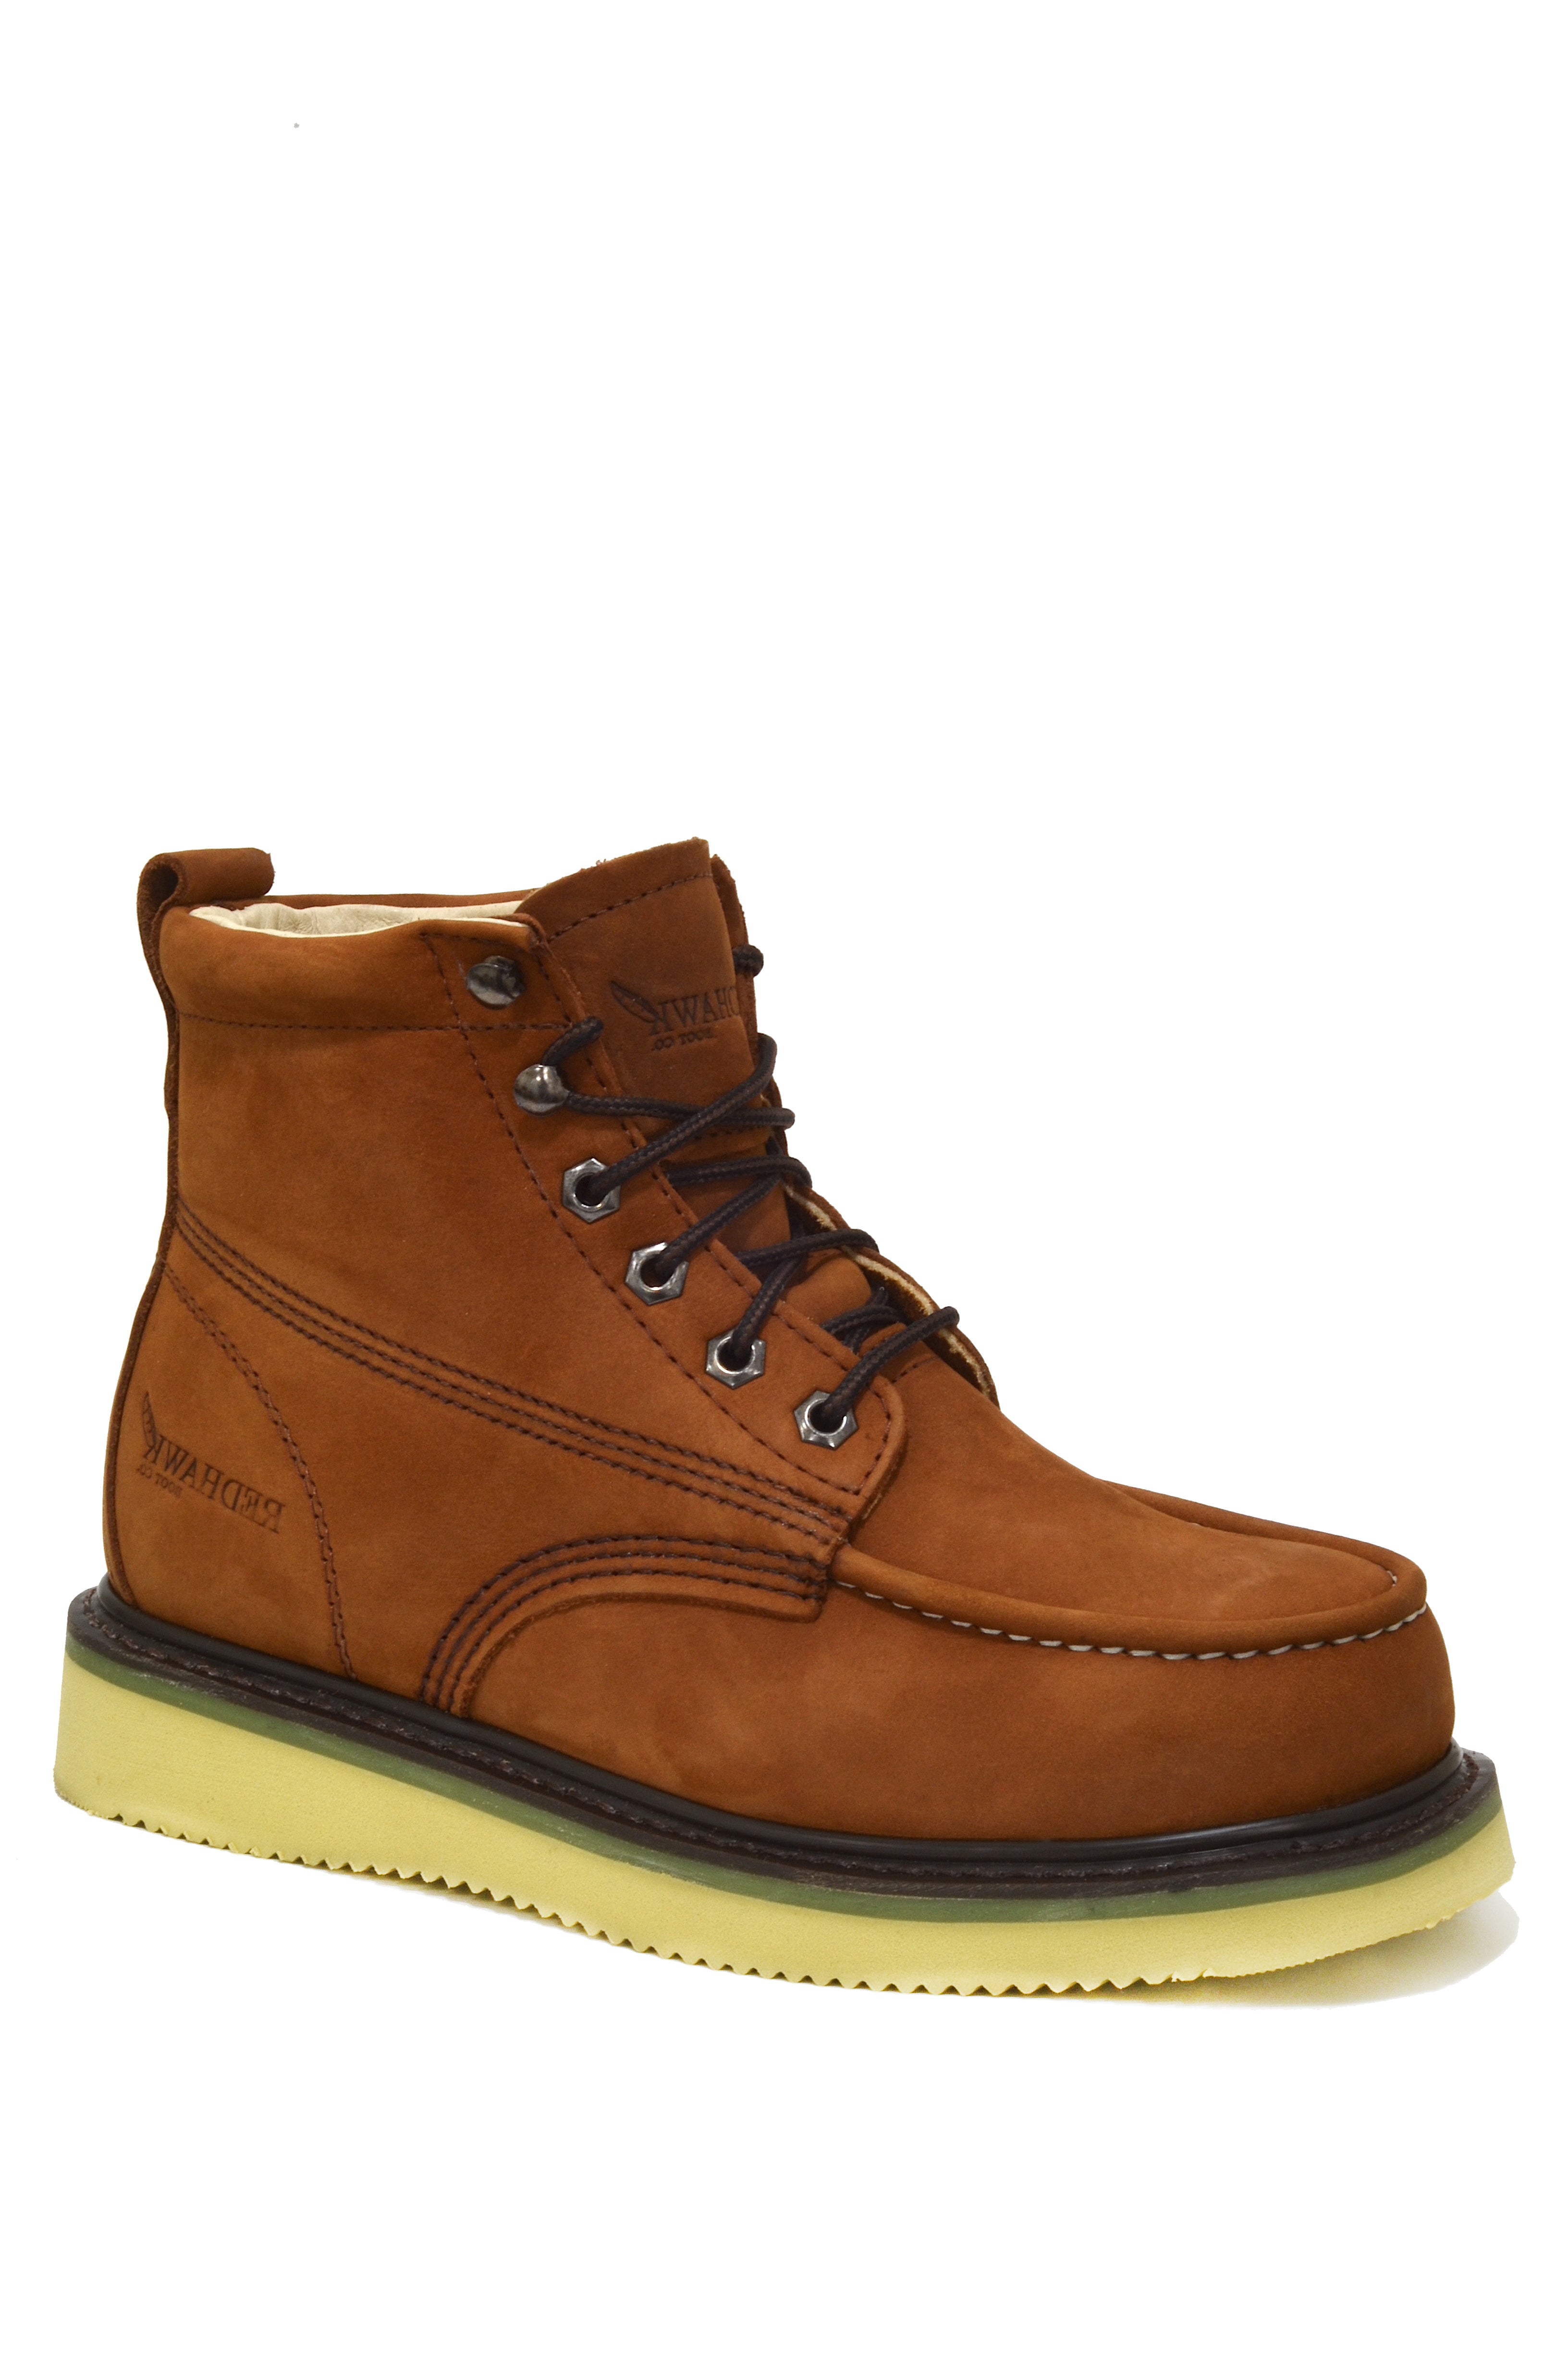 630 BROWN      *SAFETY STEEL TOE